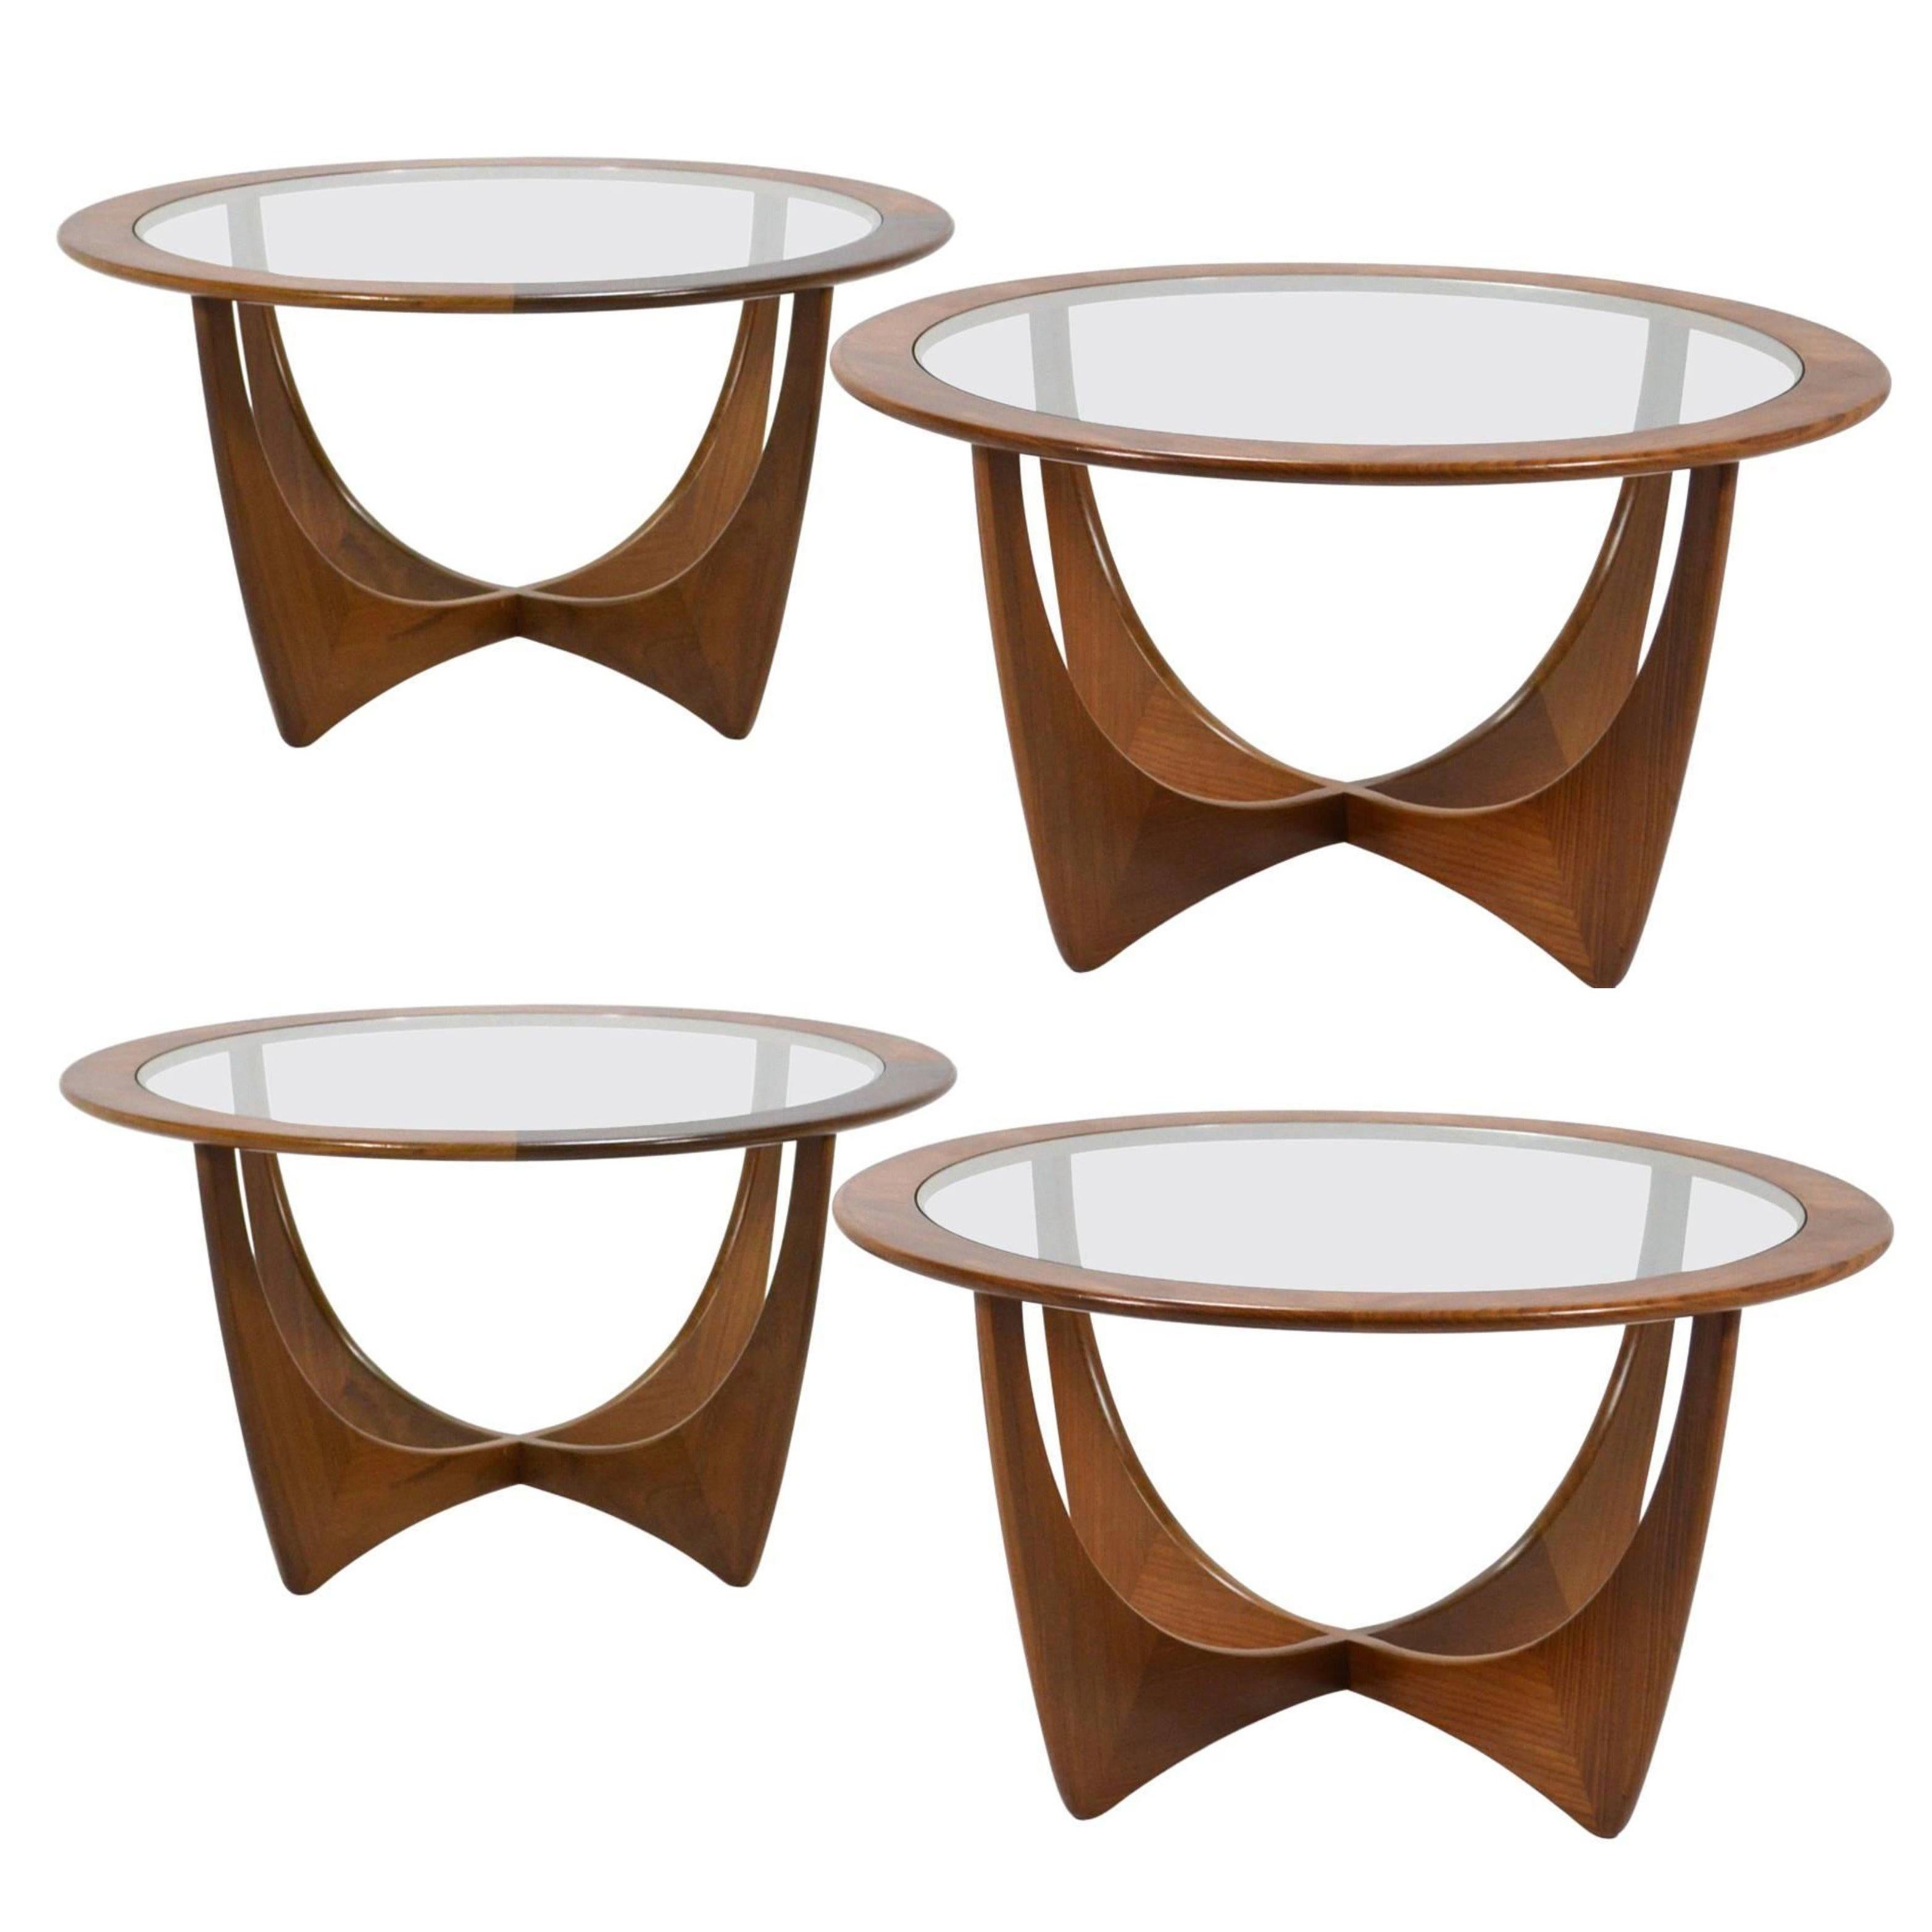 Four Mid-Century Tables of Afromisa Wood with Glass by v.B. Wilkins for G-Plan